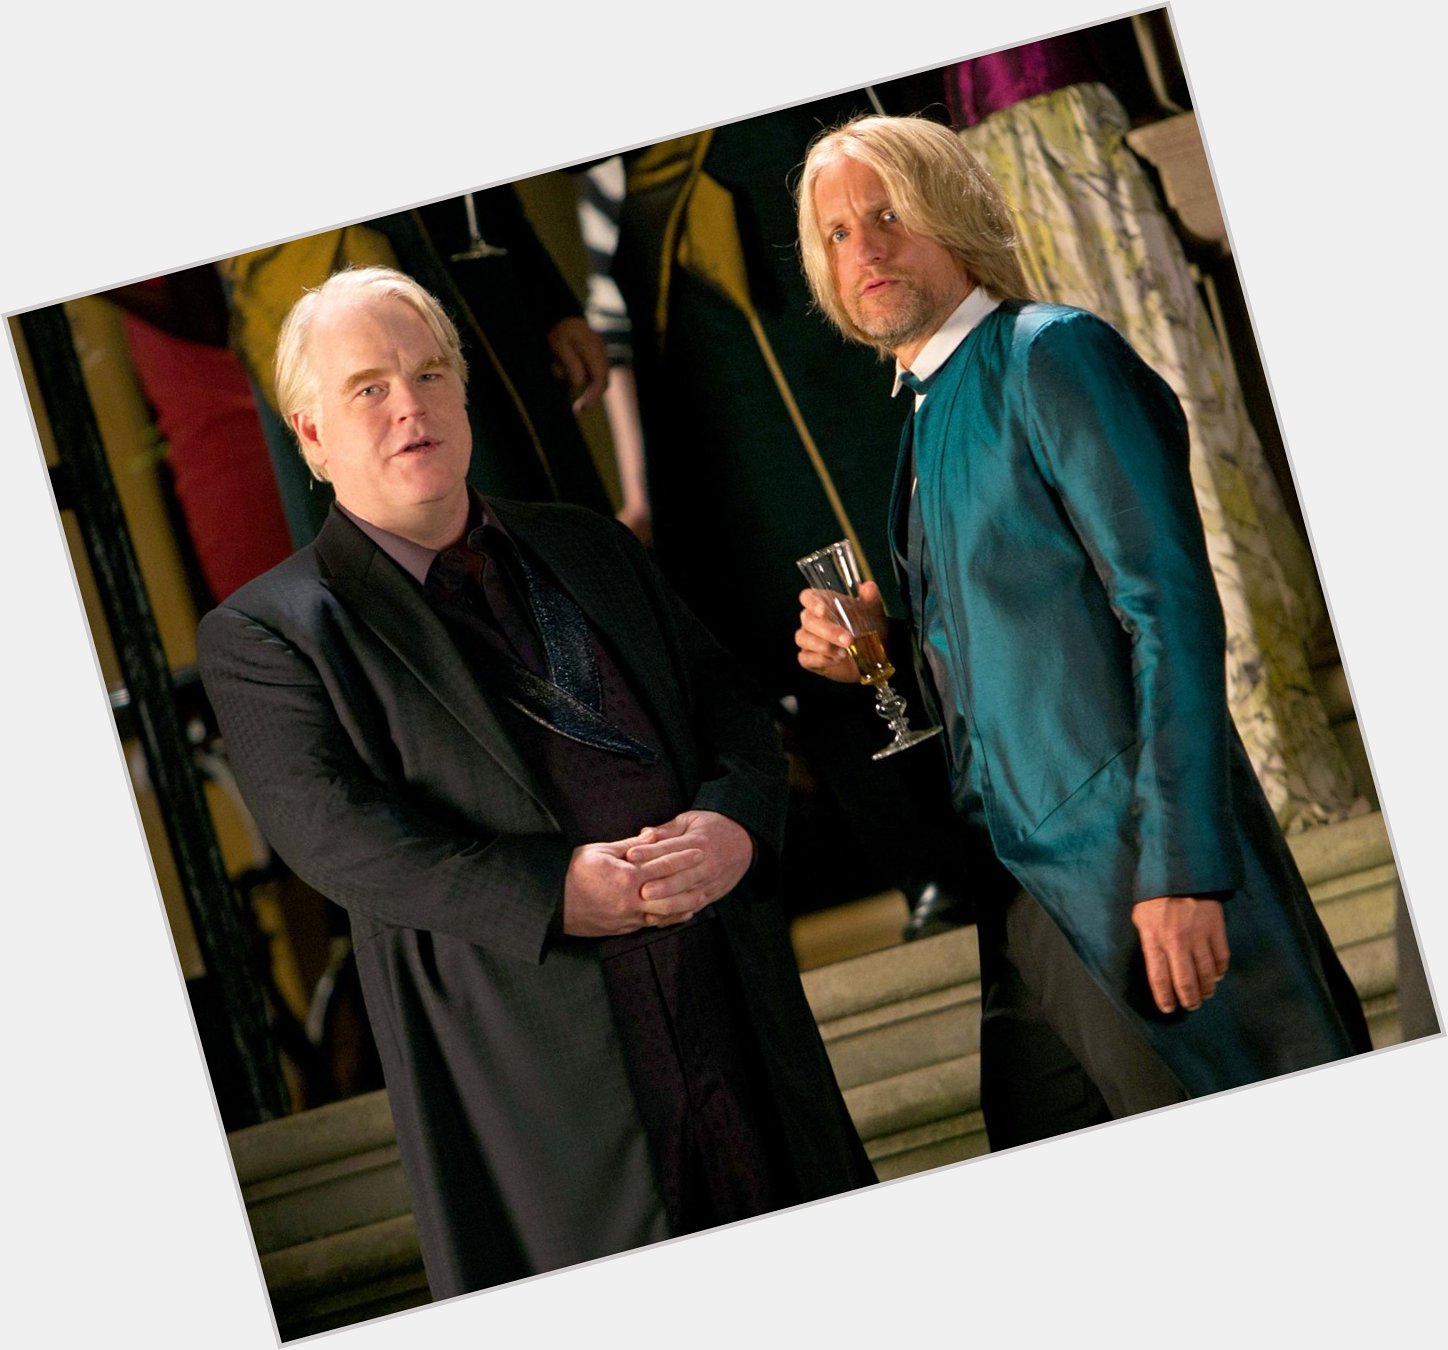 A very special Happy Birthday to our Haymitch, Woody Harrelson and Plutarch, Philip Seymour Hoffman (rest easy).  